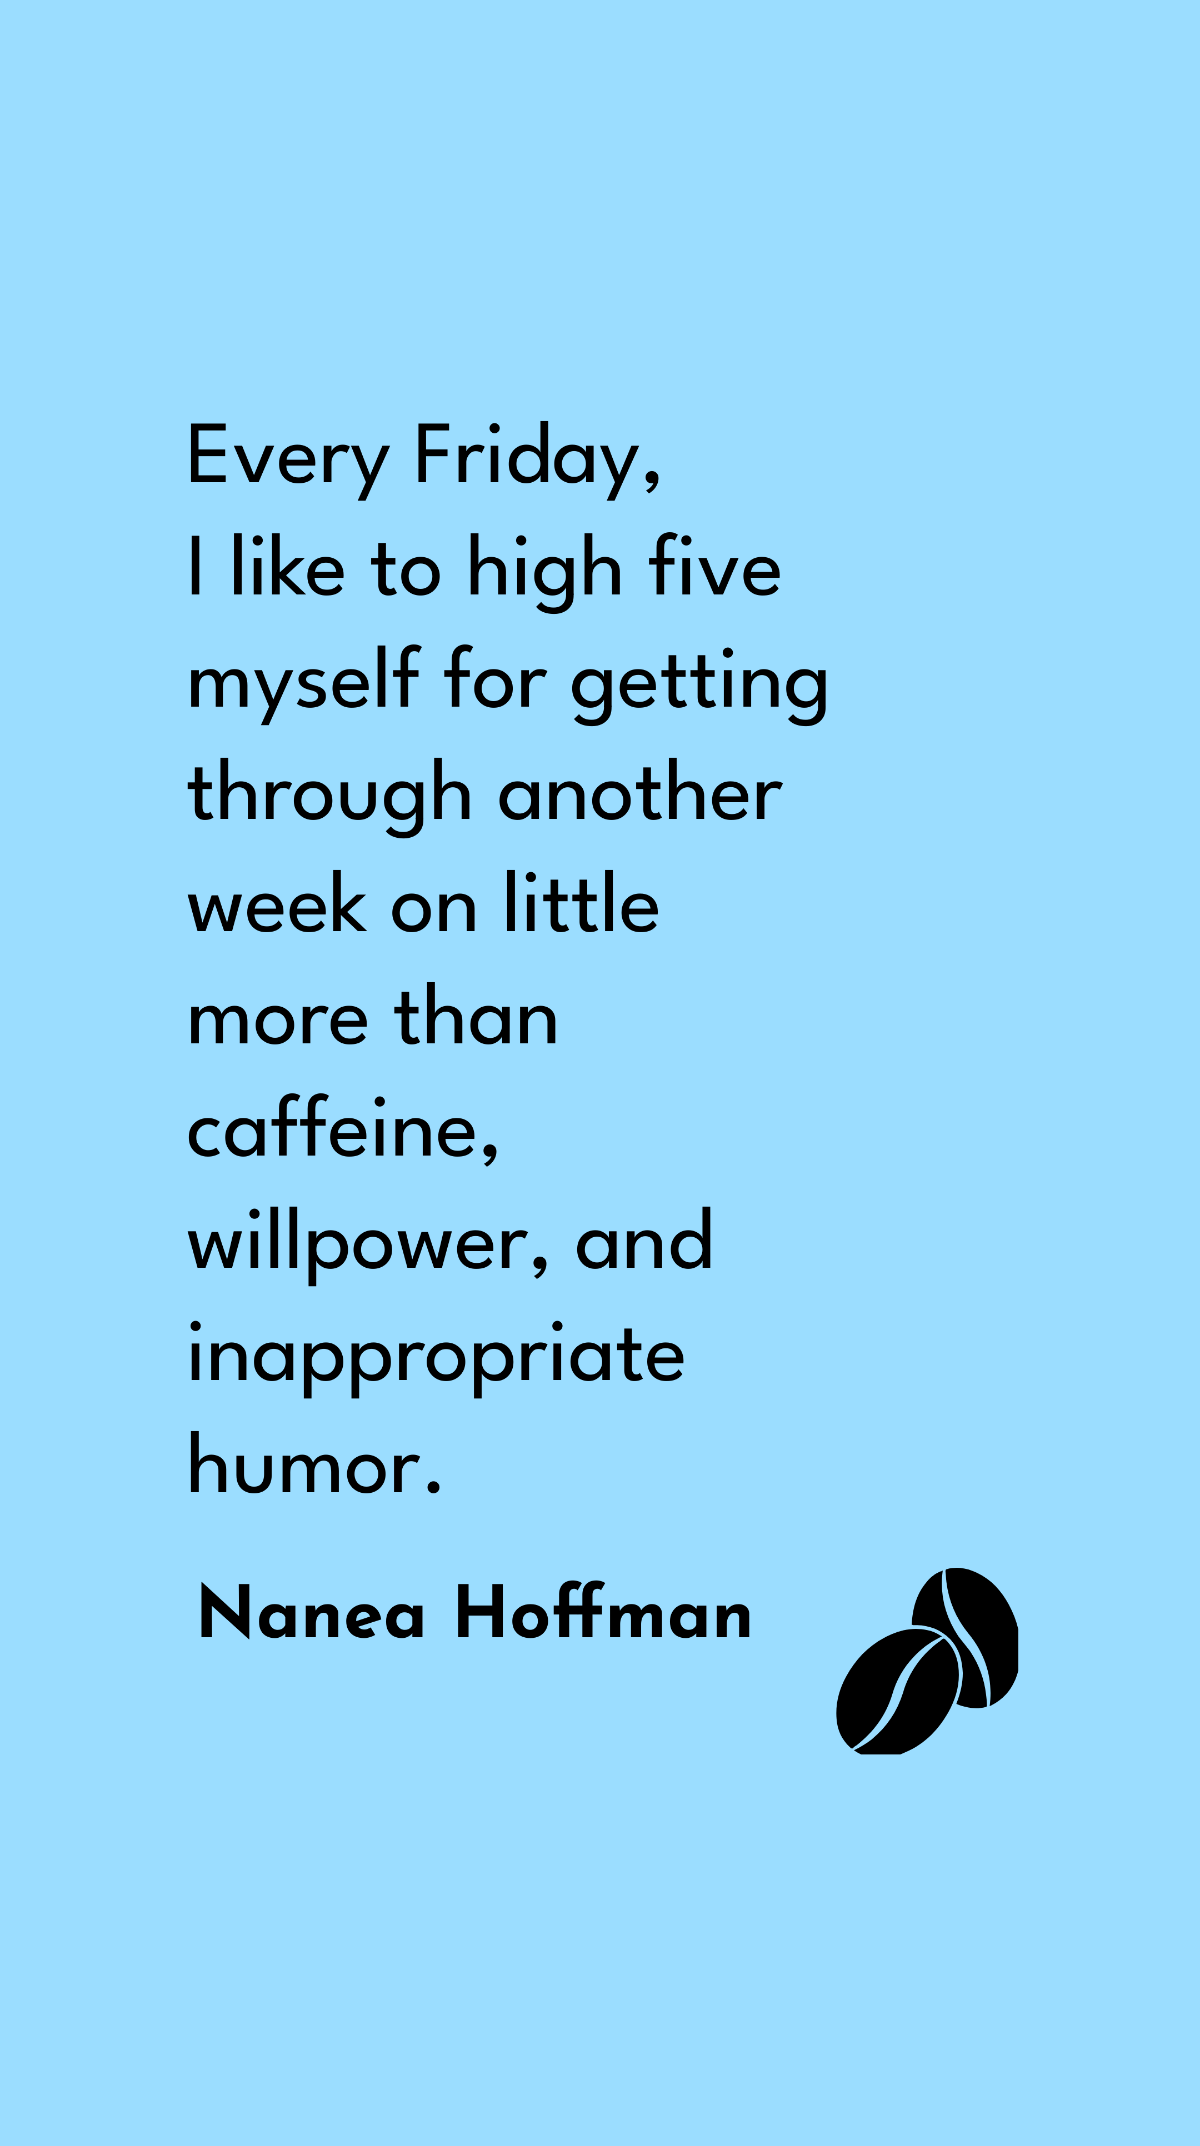 Nanea Hoffman - Every Friday, I like to high five myself for getting through another week on little more than caffeine, willpower, and inappropriate humor. Template